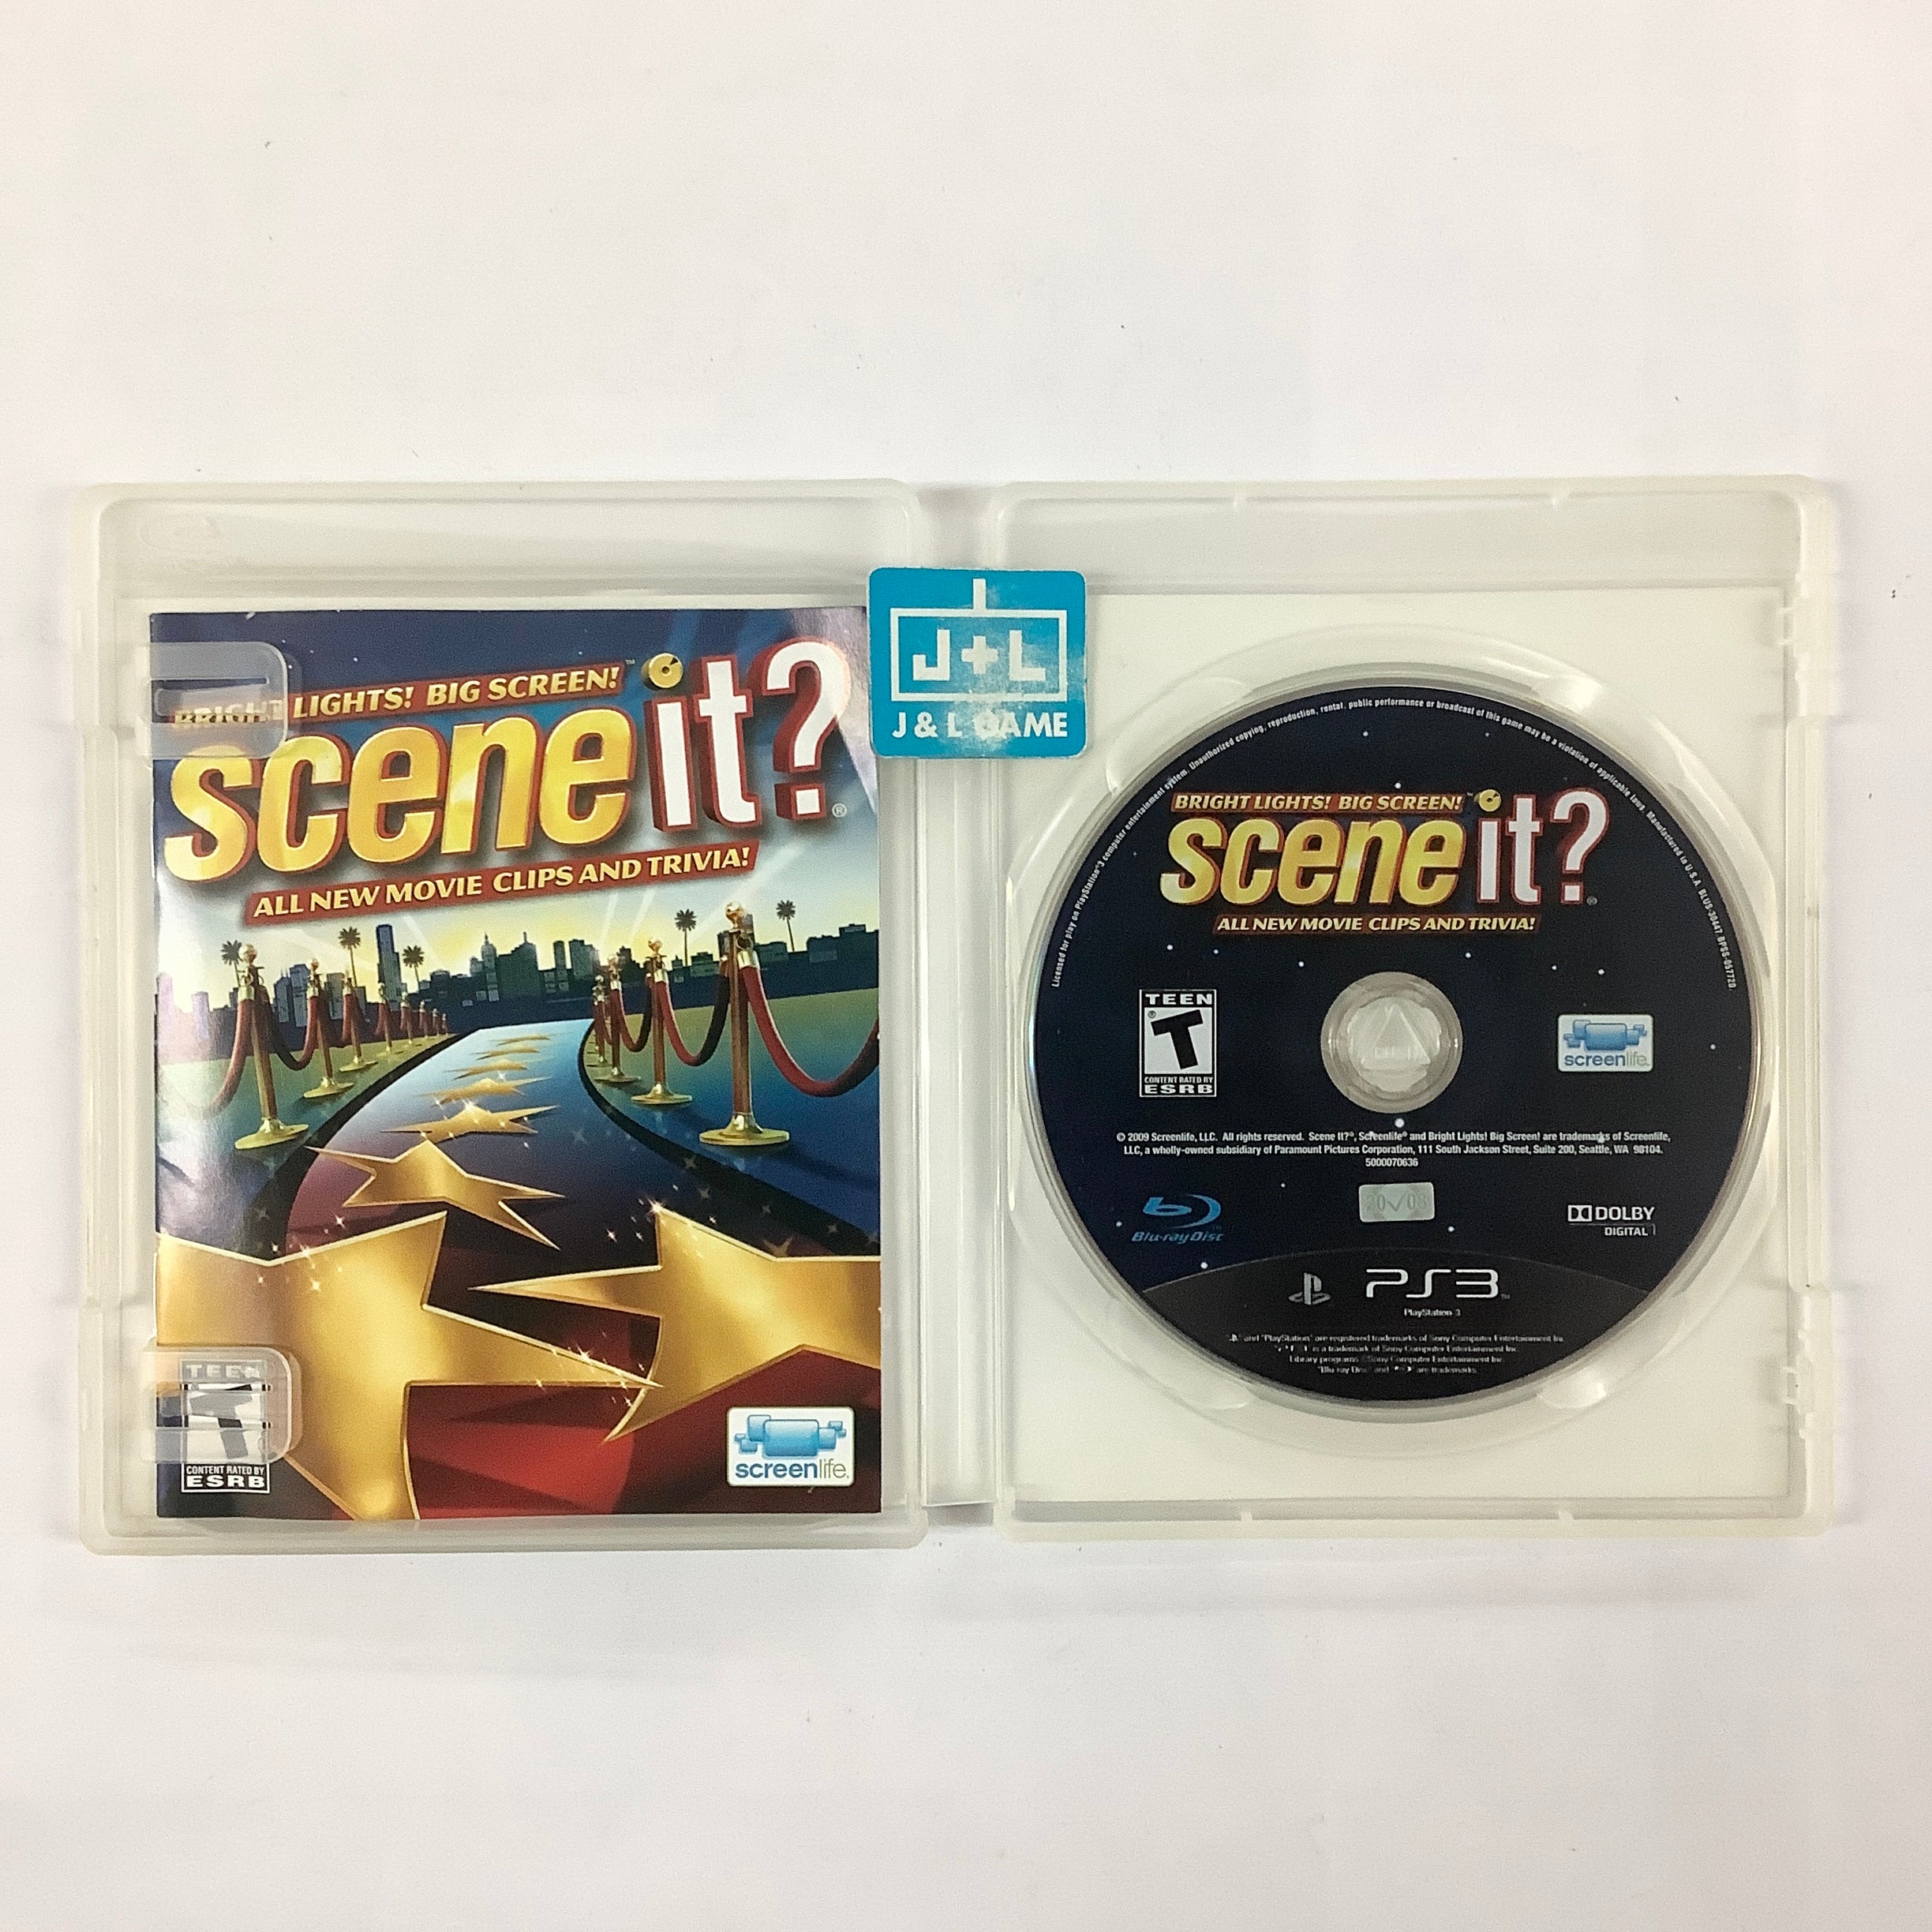 Scene It? Bright Lights! Big Screen! - (PS3) PlayStation 3 [Pre-Owned] Video Games Warner Bros. Interactive Entertainment   